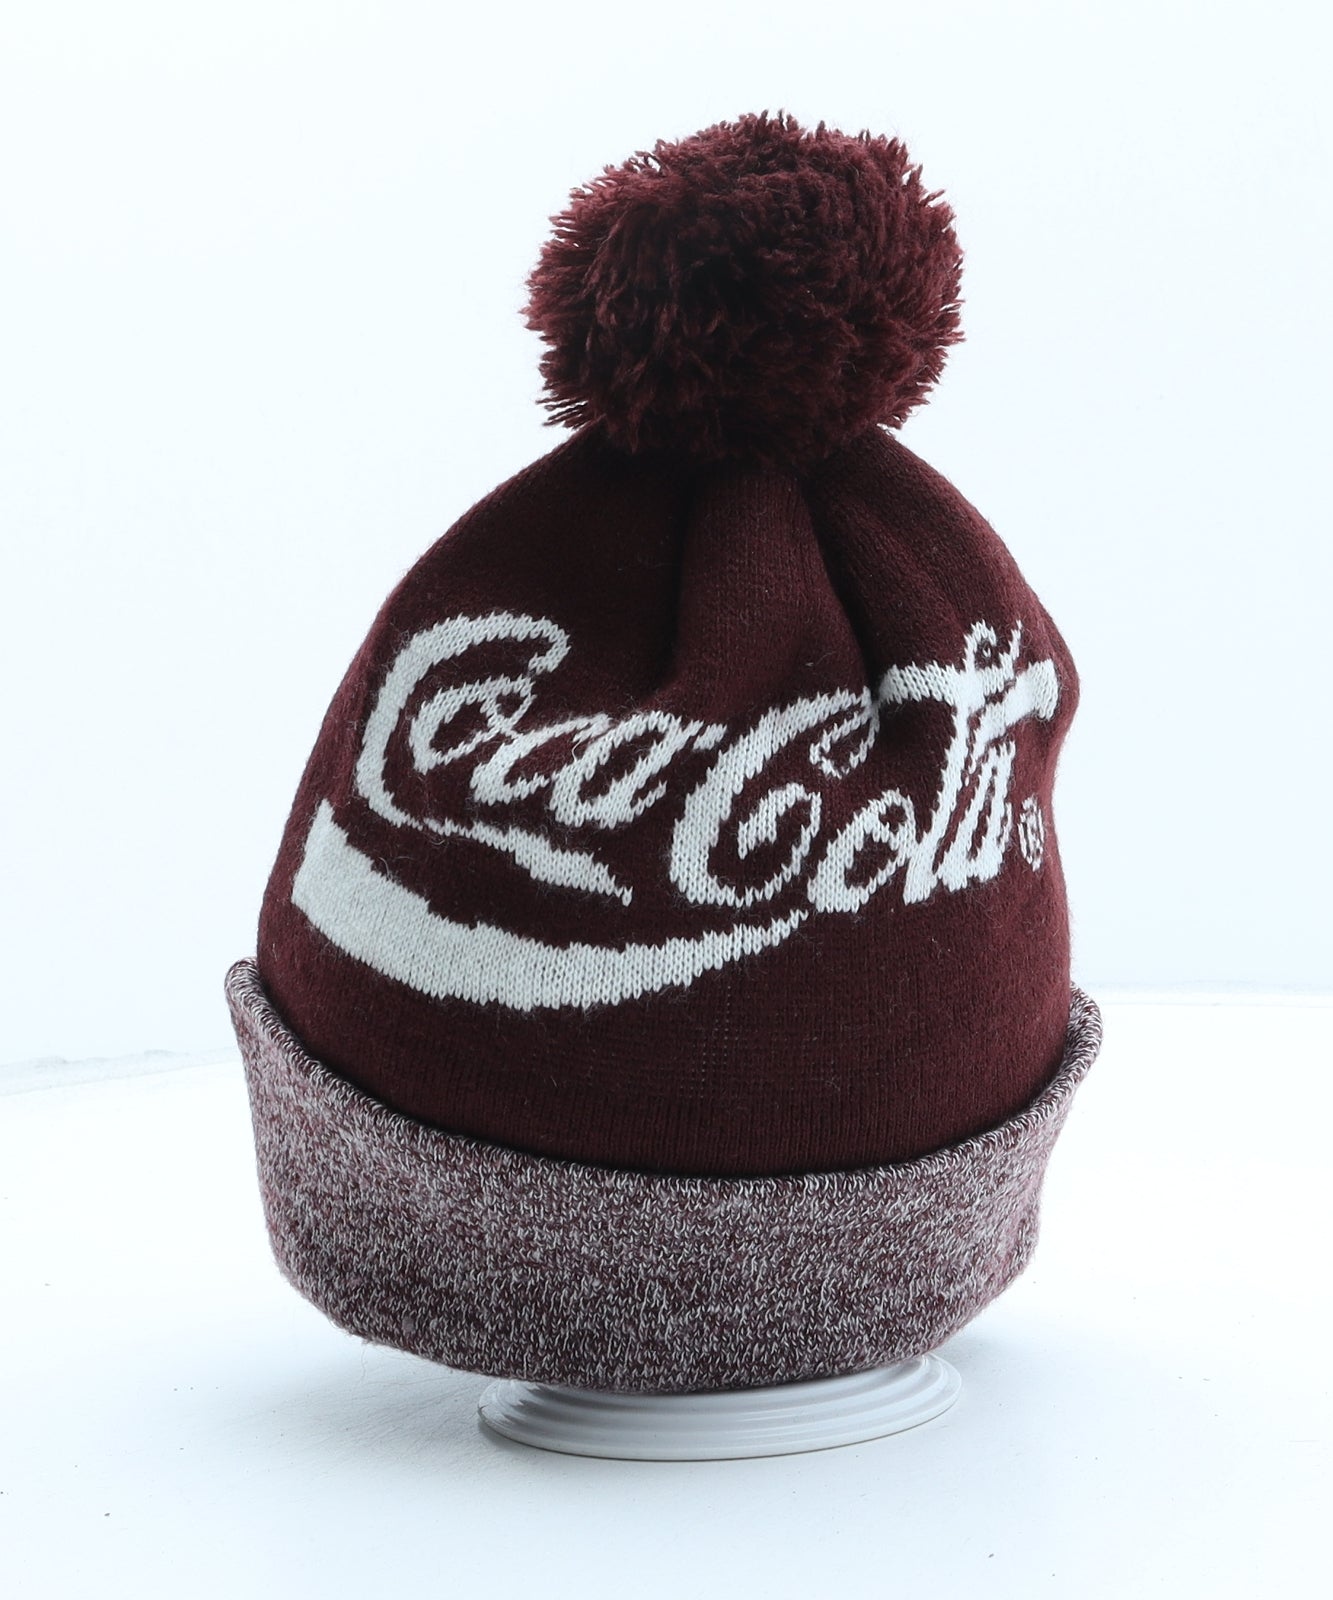 Coca-Cola Womens Red Acrylic Bobble Hat One Size